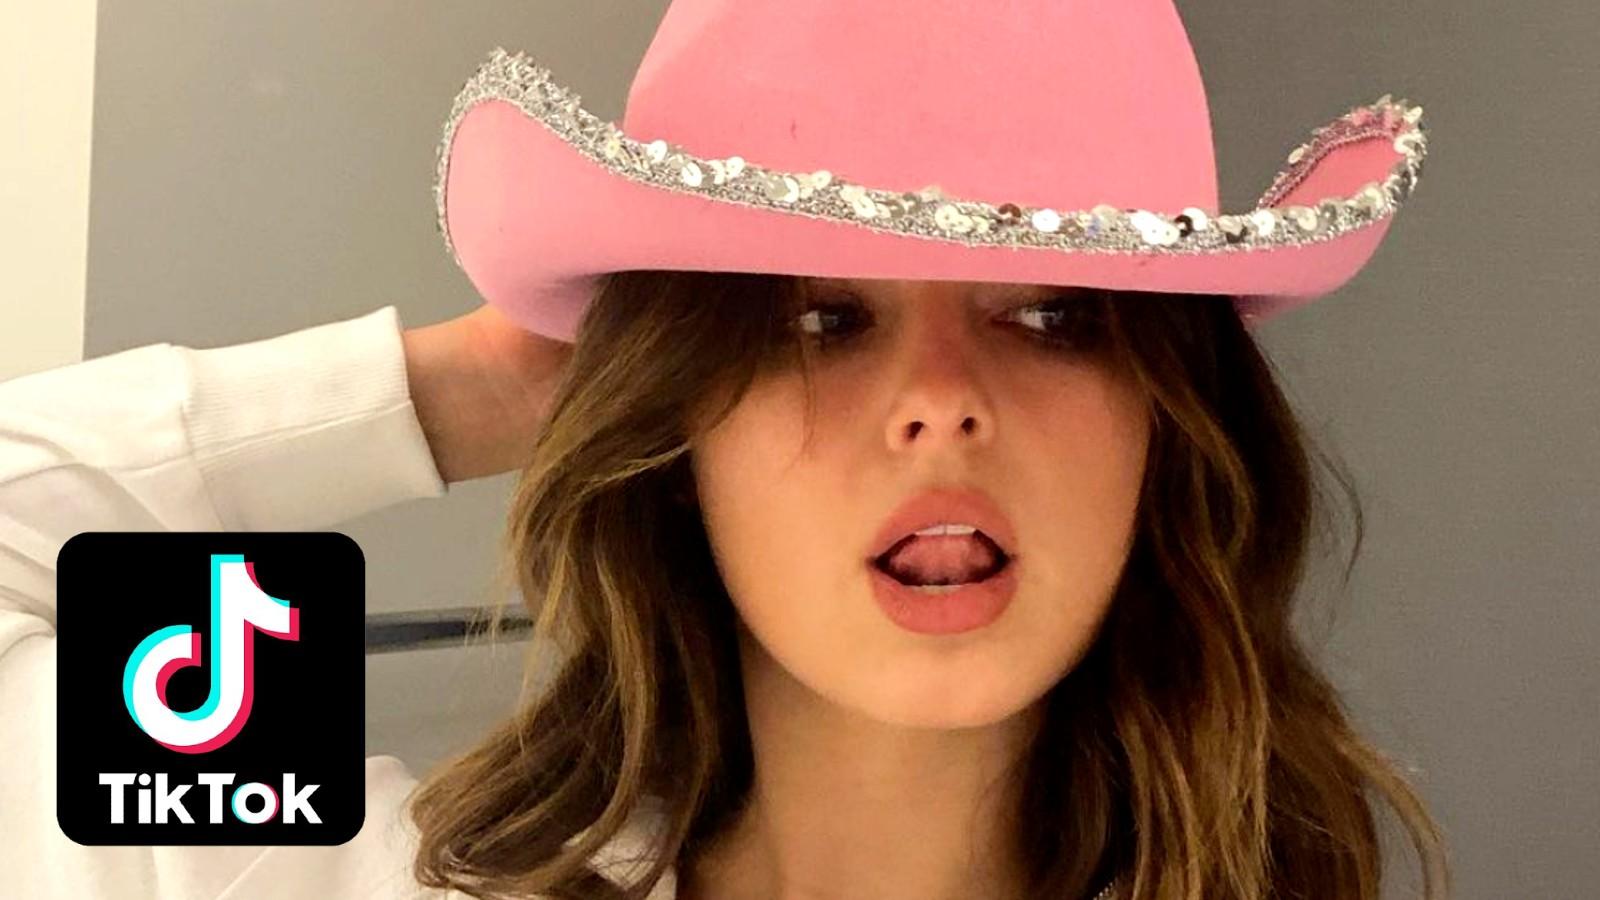 Addison Rae in a pink hat next to the TikTok logo